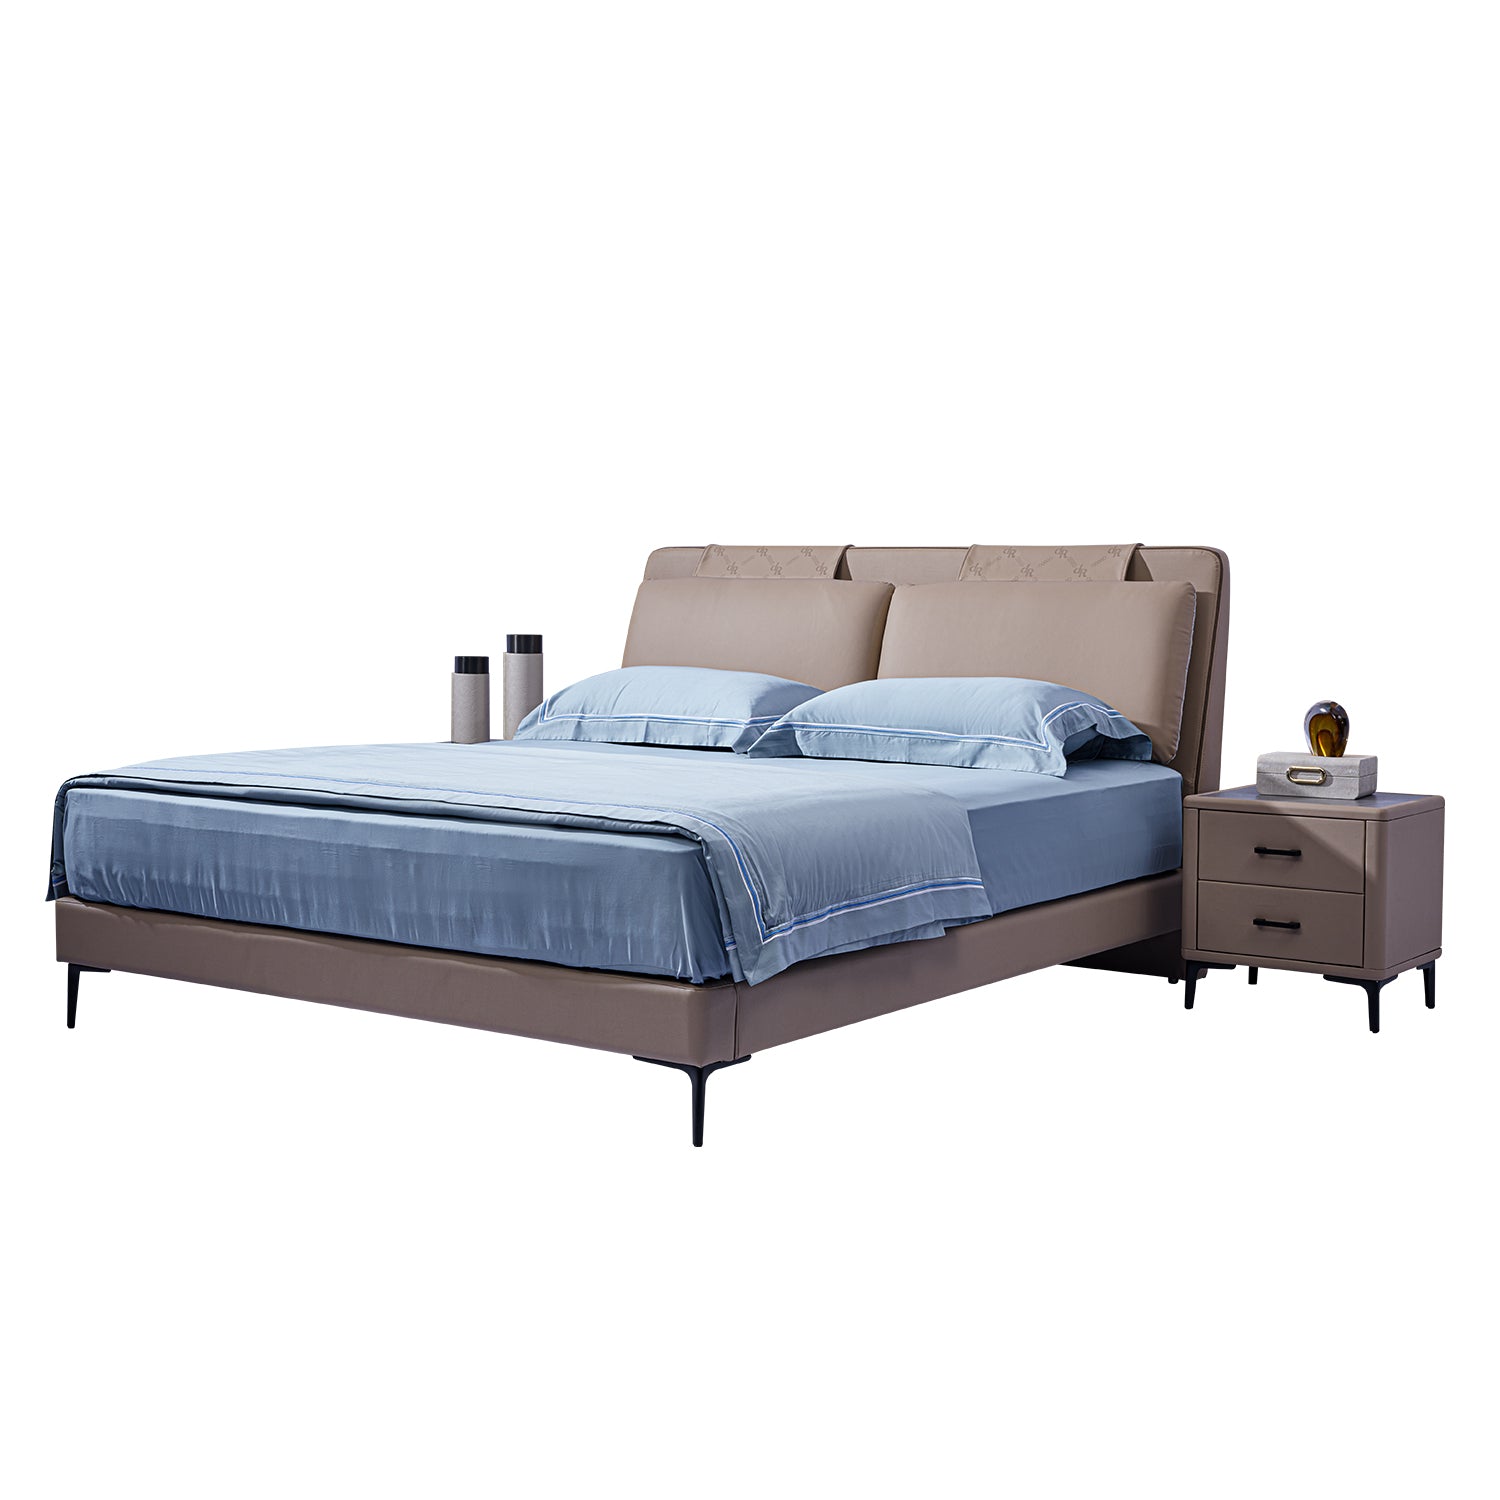 DeRUCCI bed frame model BOC1-006 upholstered in beige leather with light blue bedding, accompanied by a matching bedside table with drawers and decor.